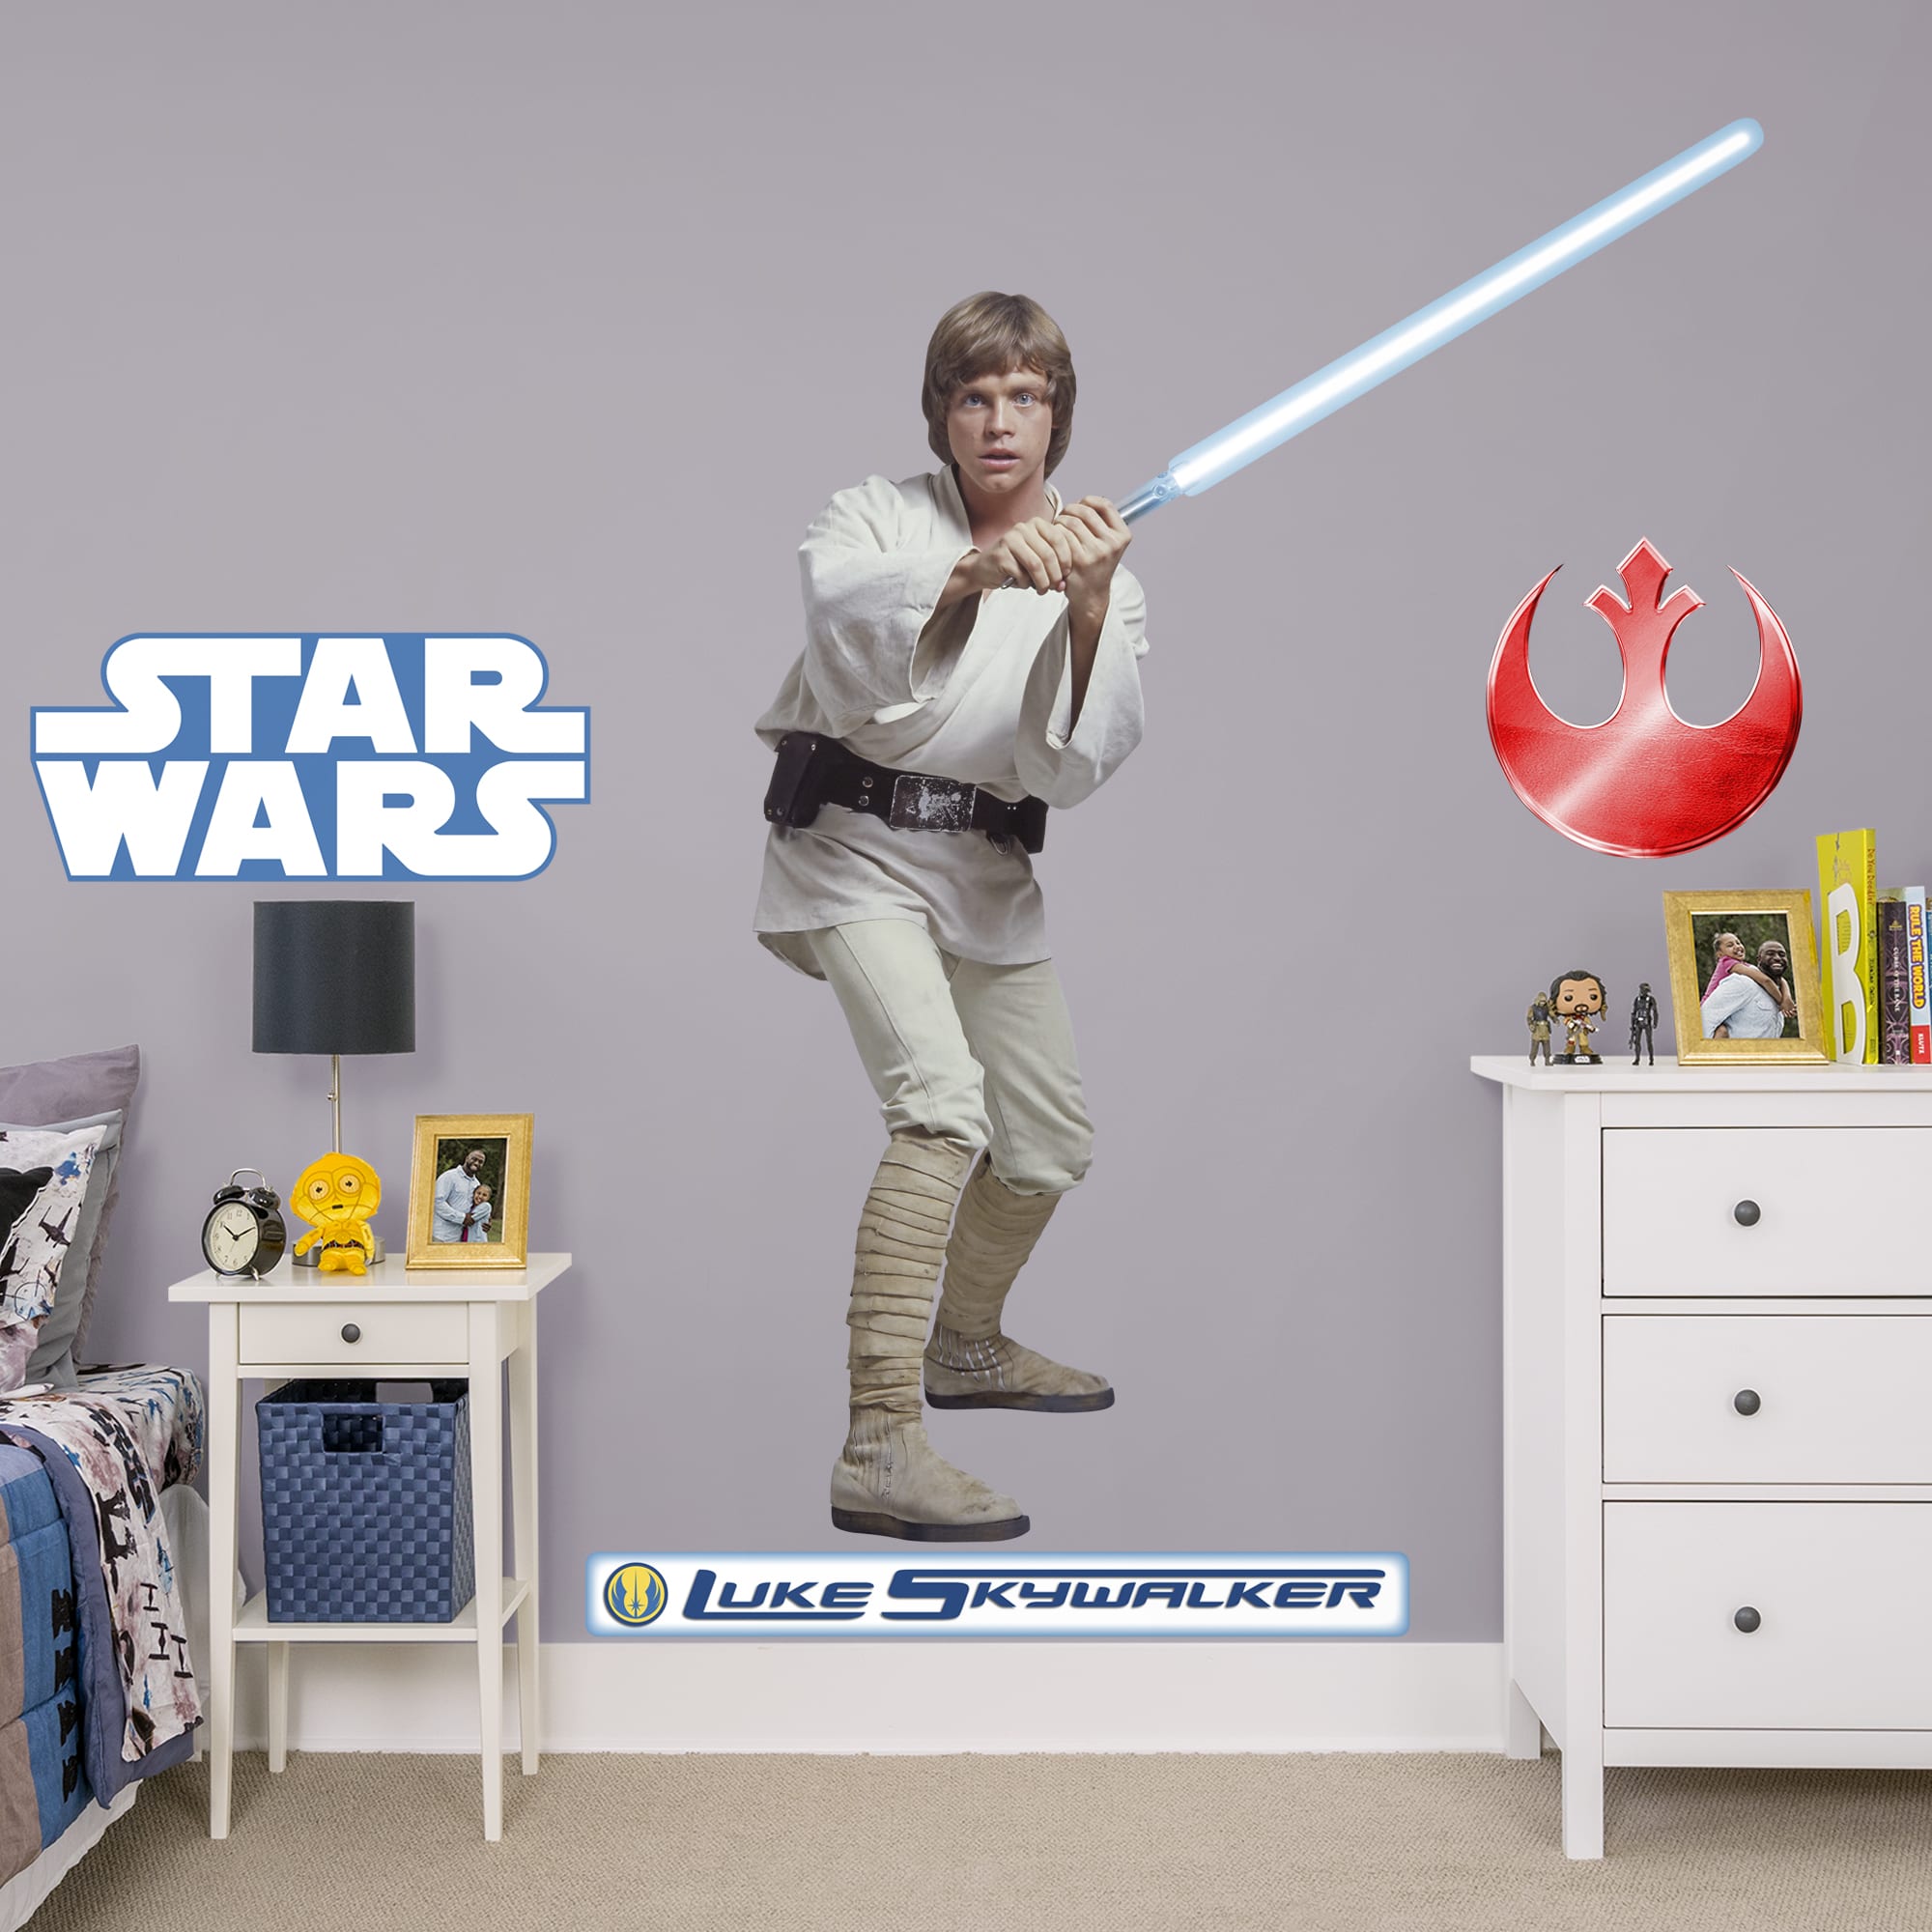 Luke Skywalker - Officially Licensed Removable Wall Decal Life-Size Character + 3 Decals (55"W x 78"H) by Fathead | Vinyl